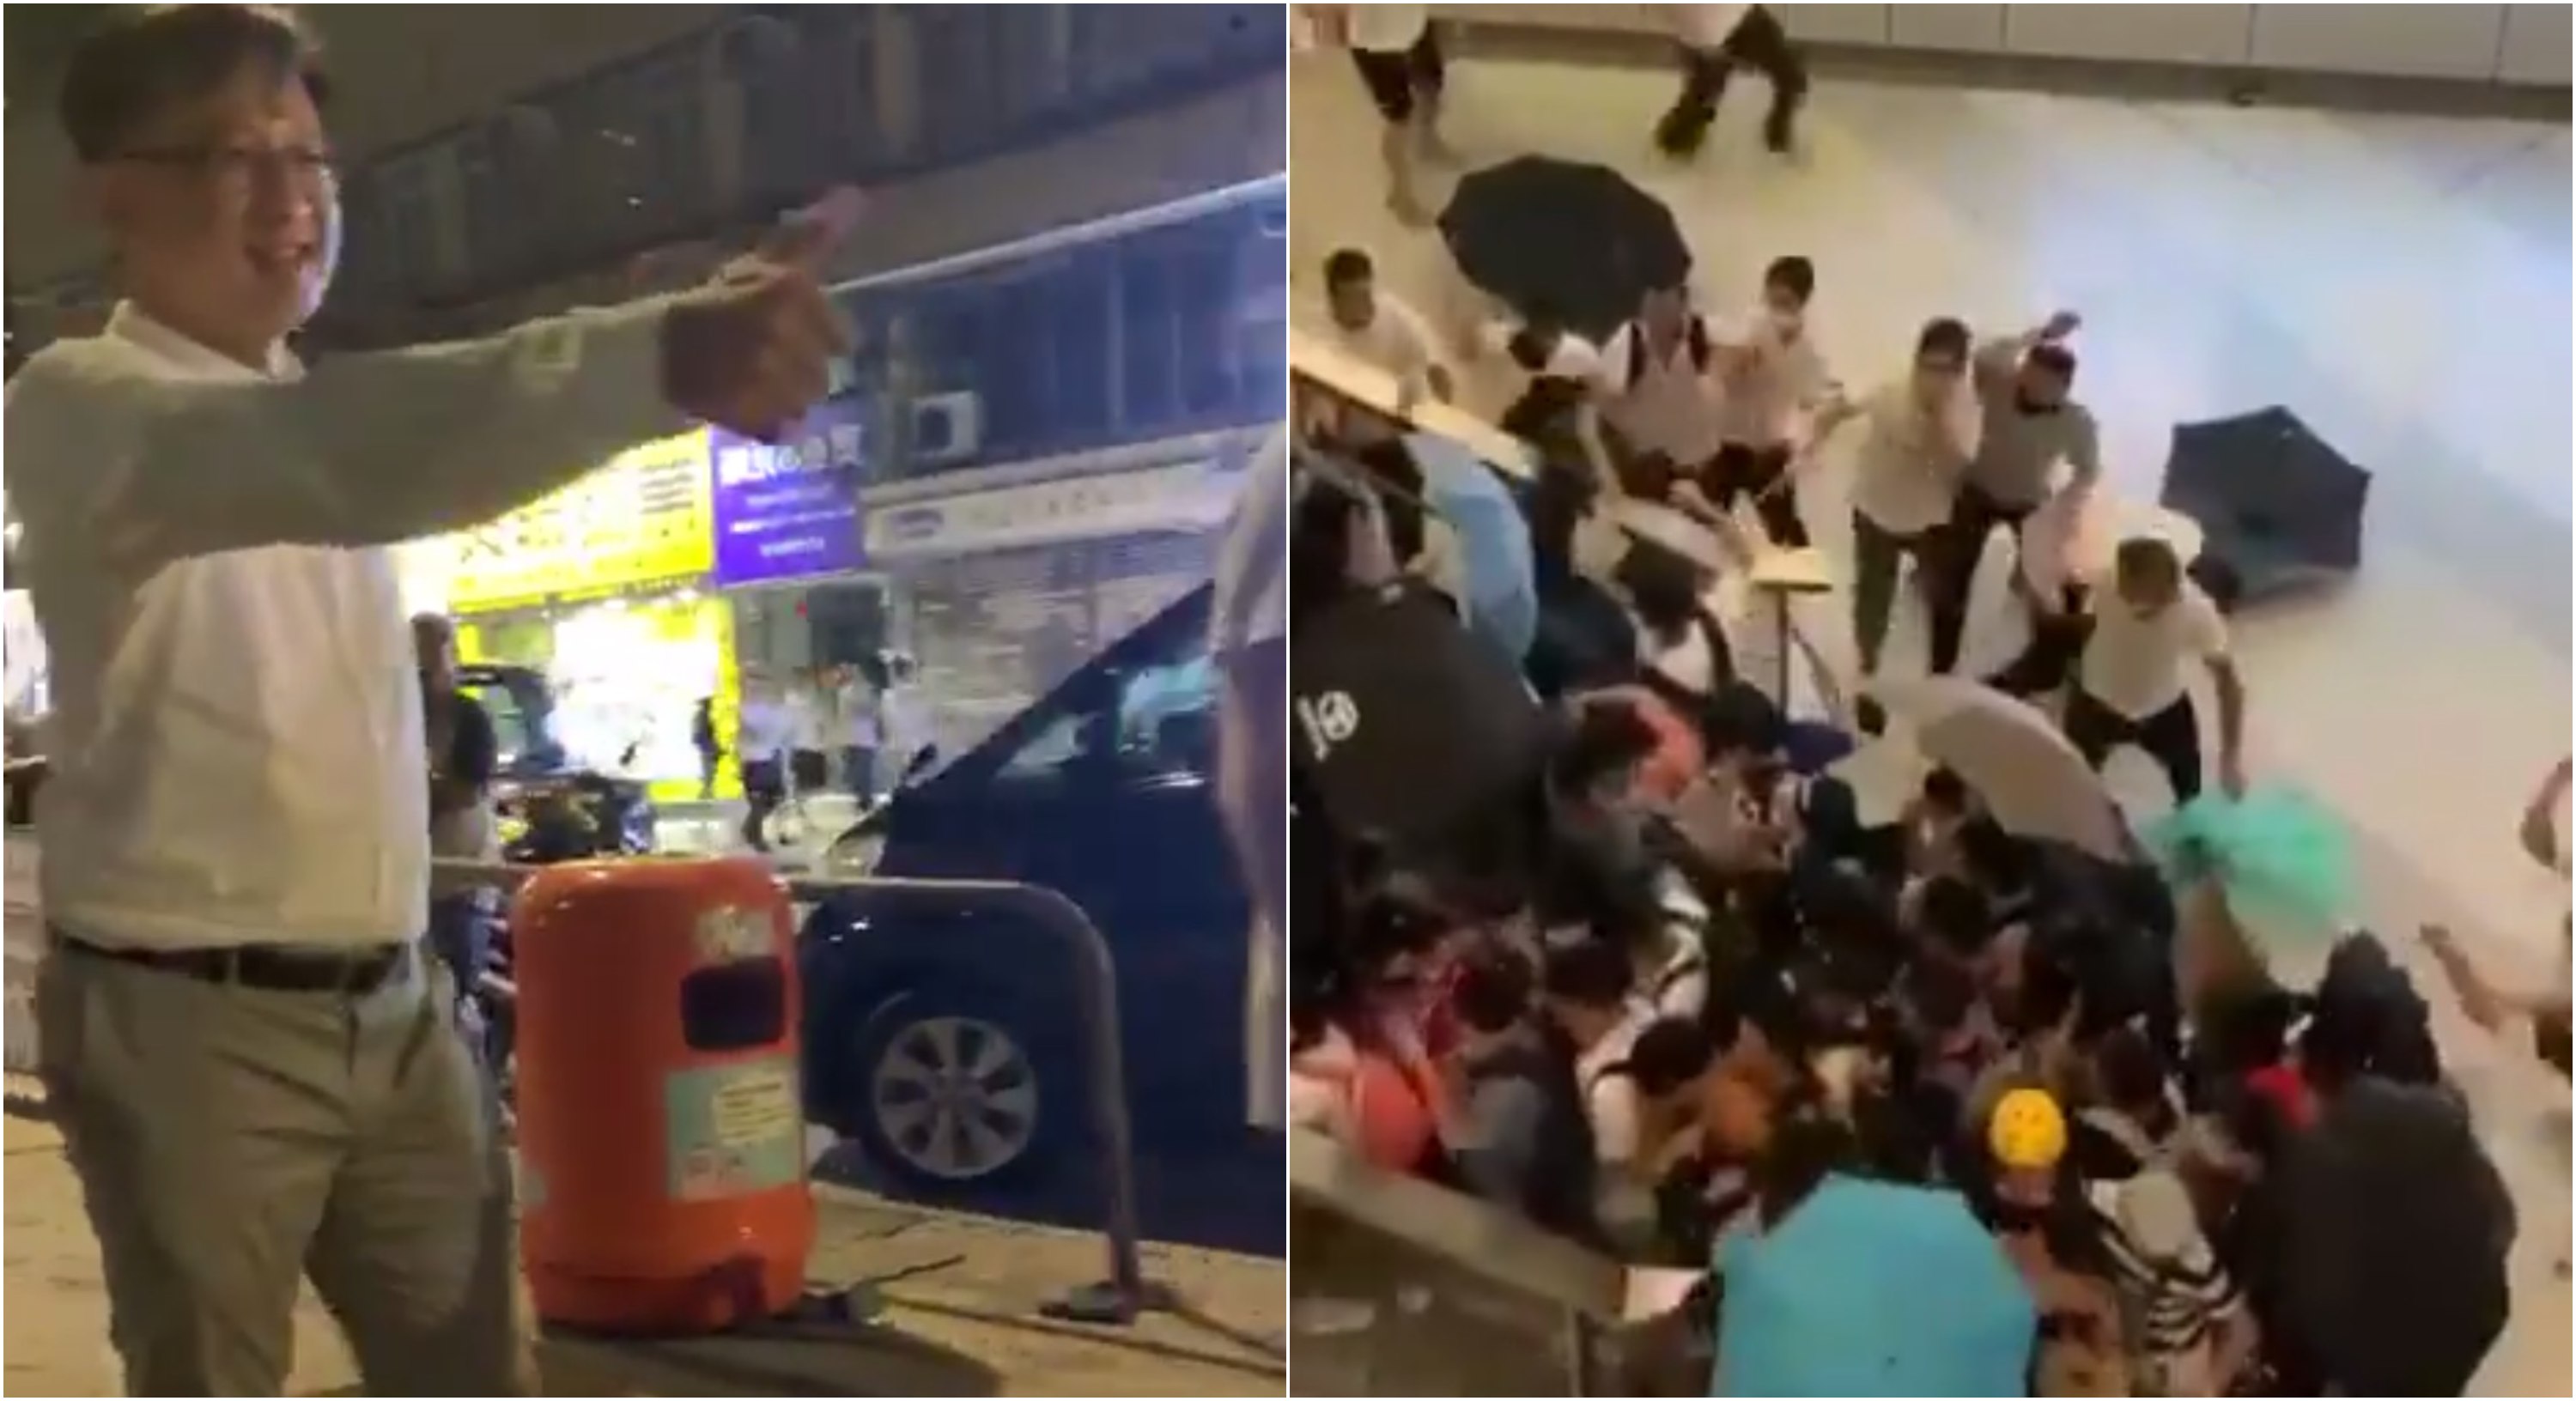 Pro-Beijing lawmaker Junius Ho (left) gives a thumbs-up to men suspected of taking part in mob violence at the Yuen Long MTR station last night (right). Screengrabs via Facebook.